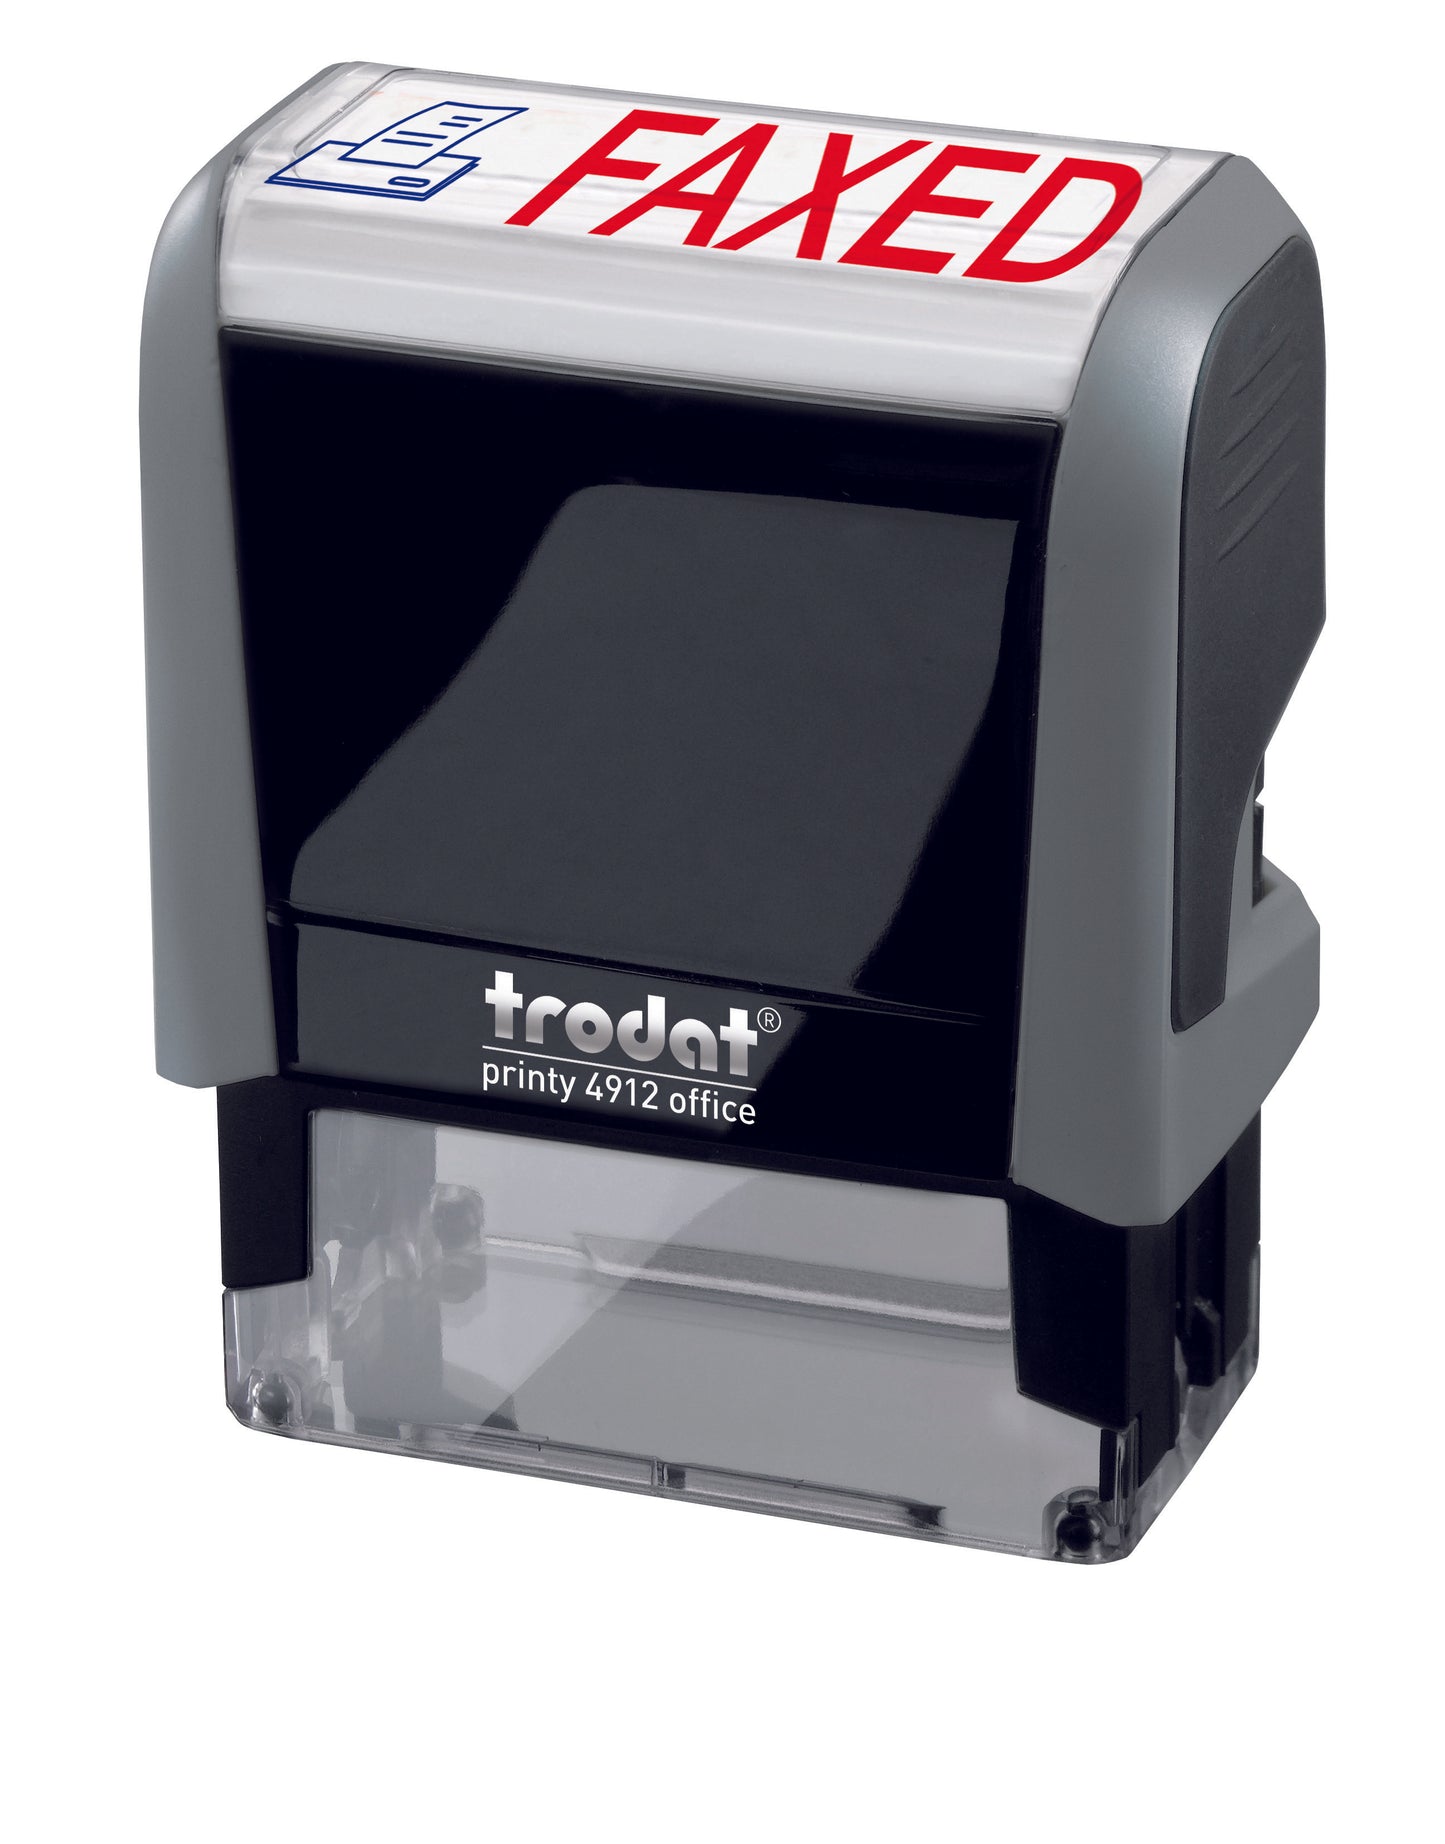 Trodat FAXED Ideal 4912 Custom Self-Inking Rubber Stamp Right Angle